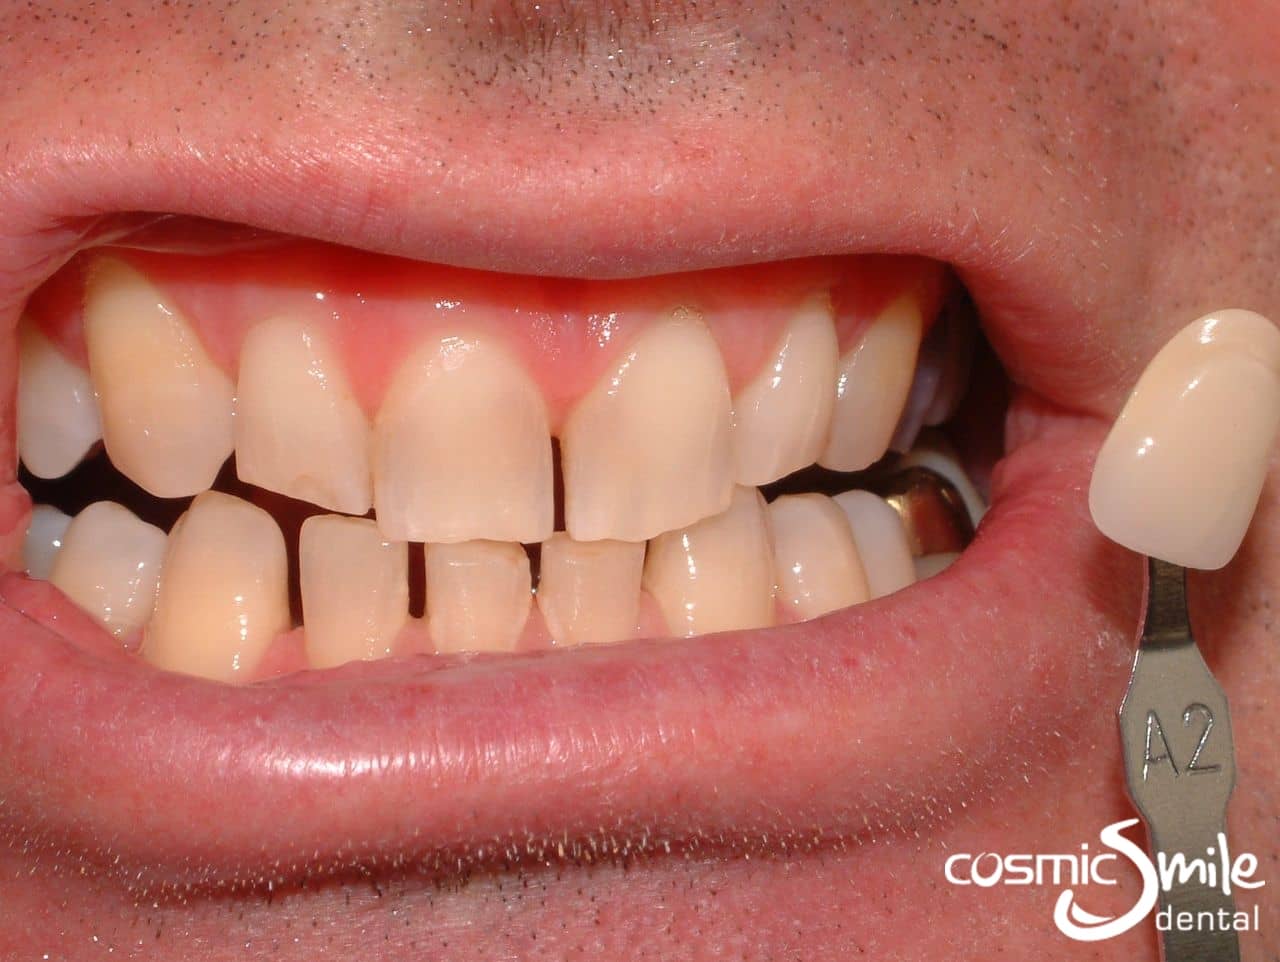 before ZOOM teeth whitening shade A2